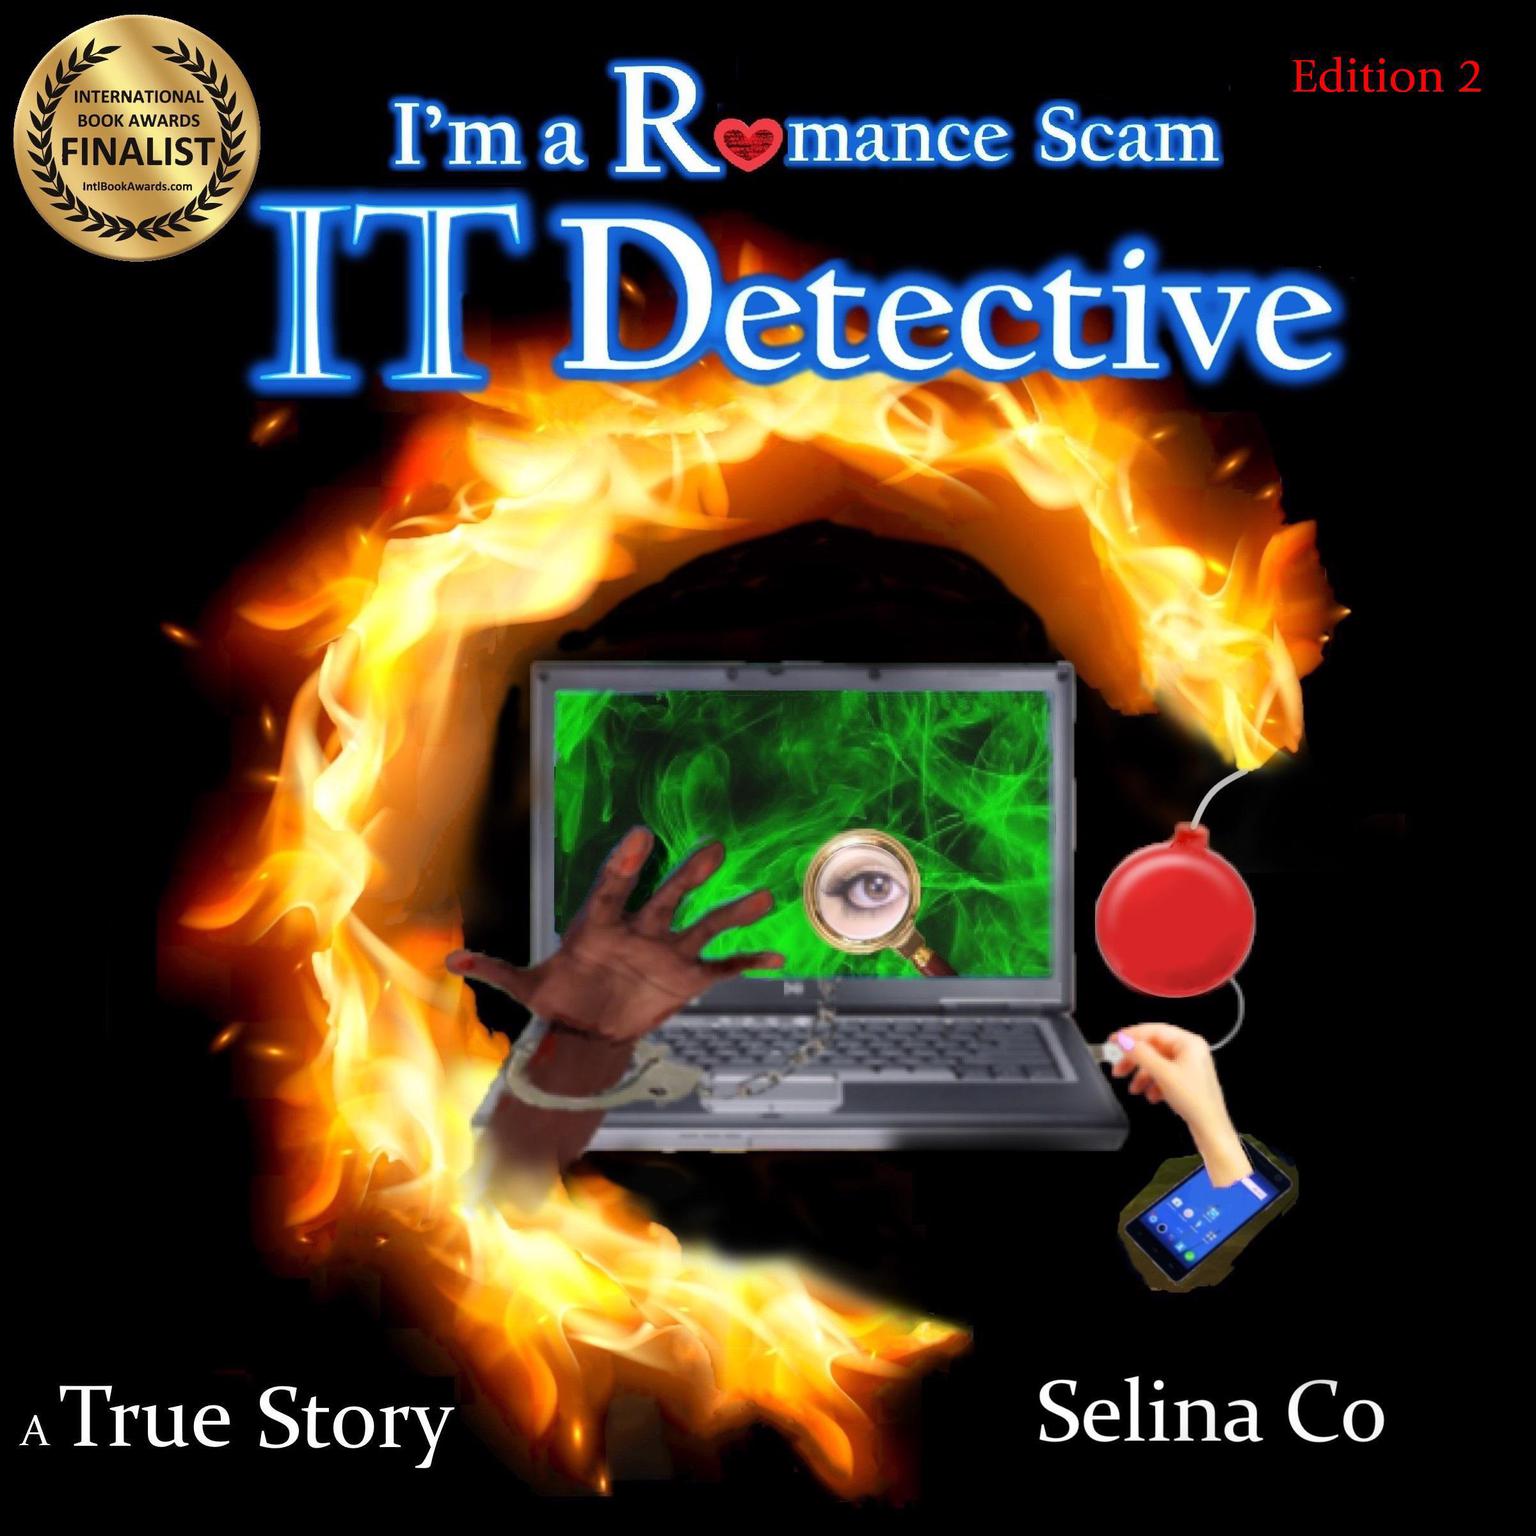 Im a Romance Scam IT Detective (Edition 2) (Abridged) Audiobook, by Selina Co